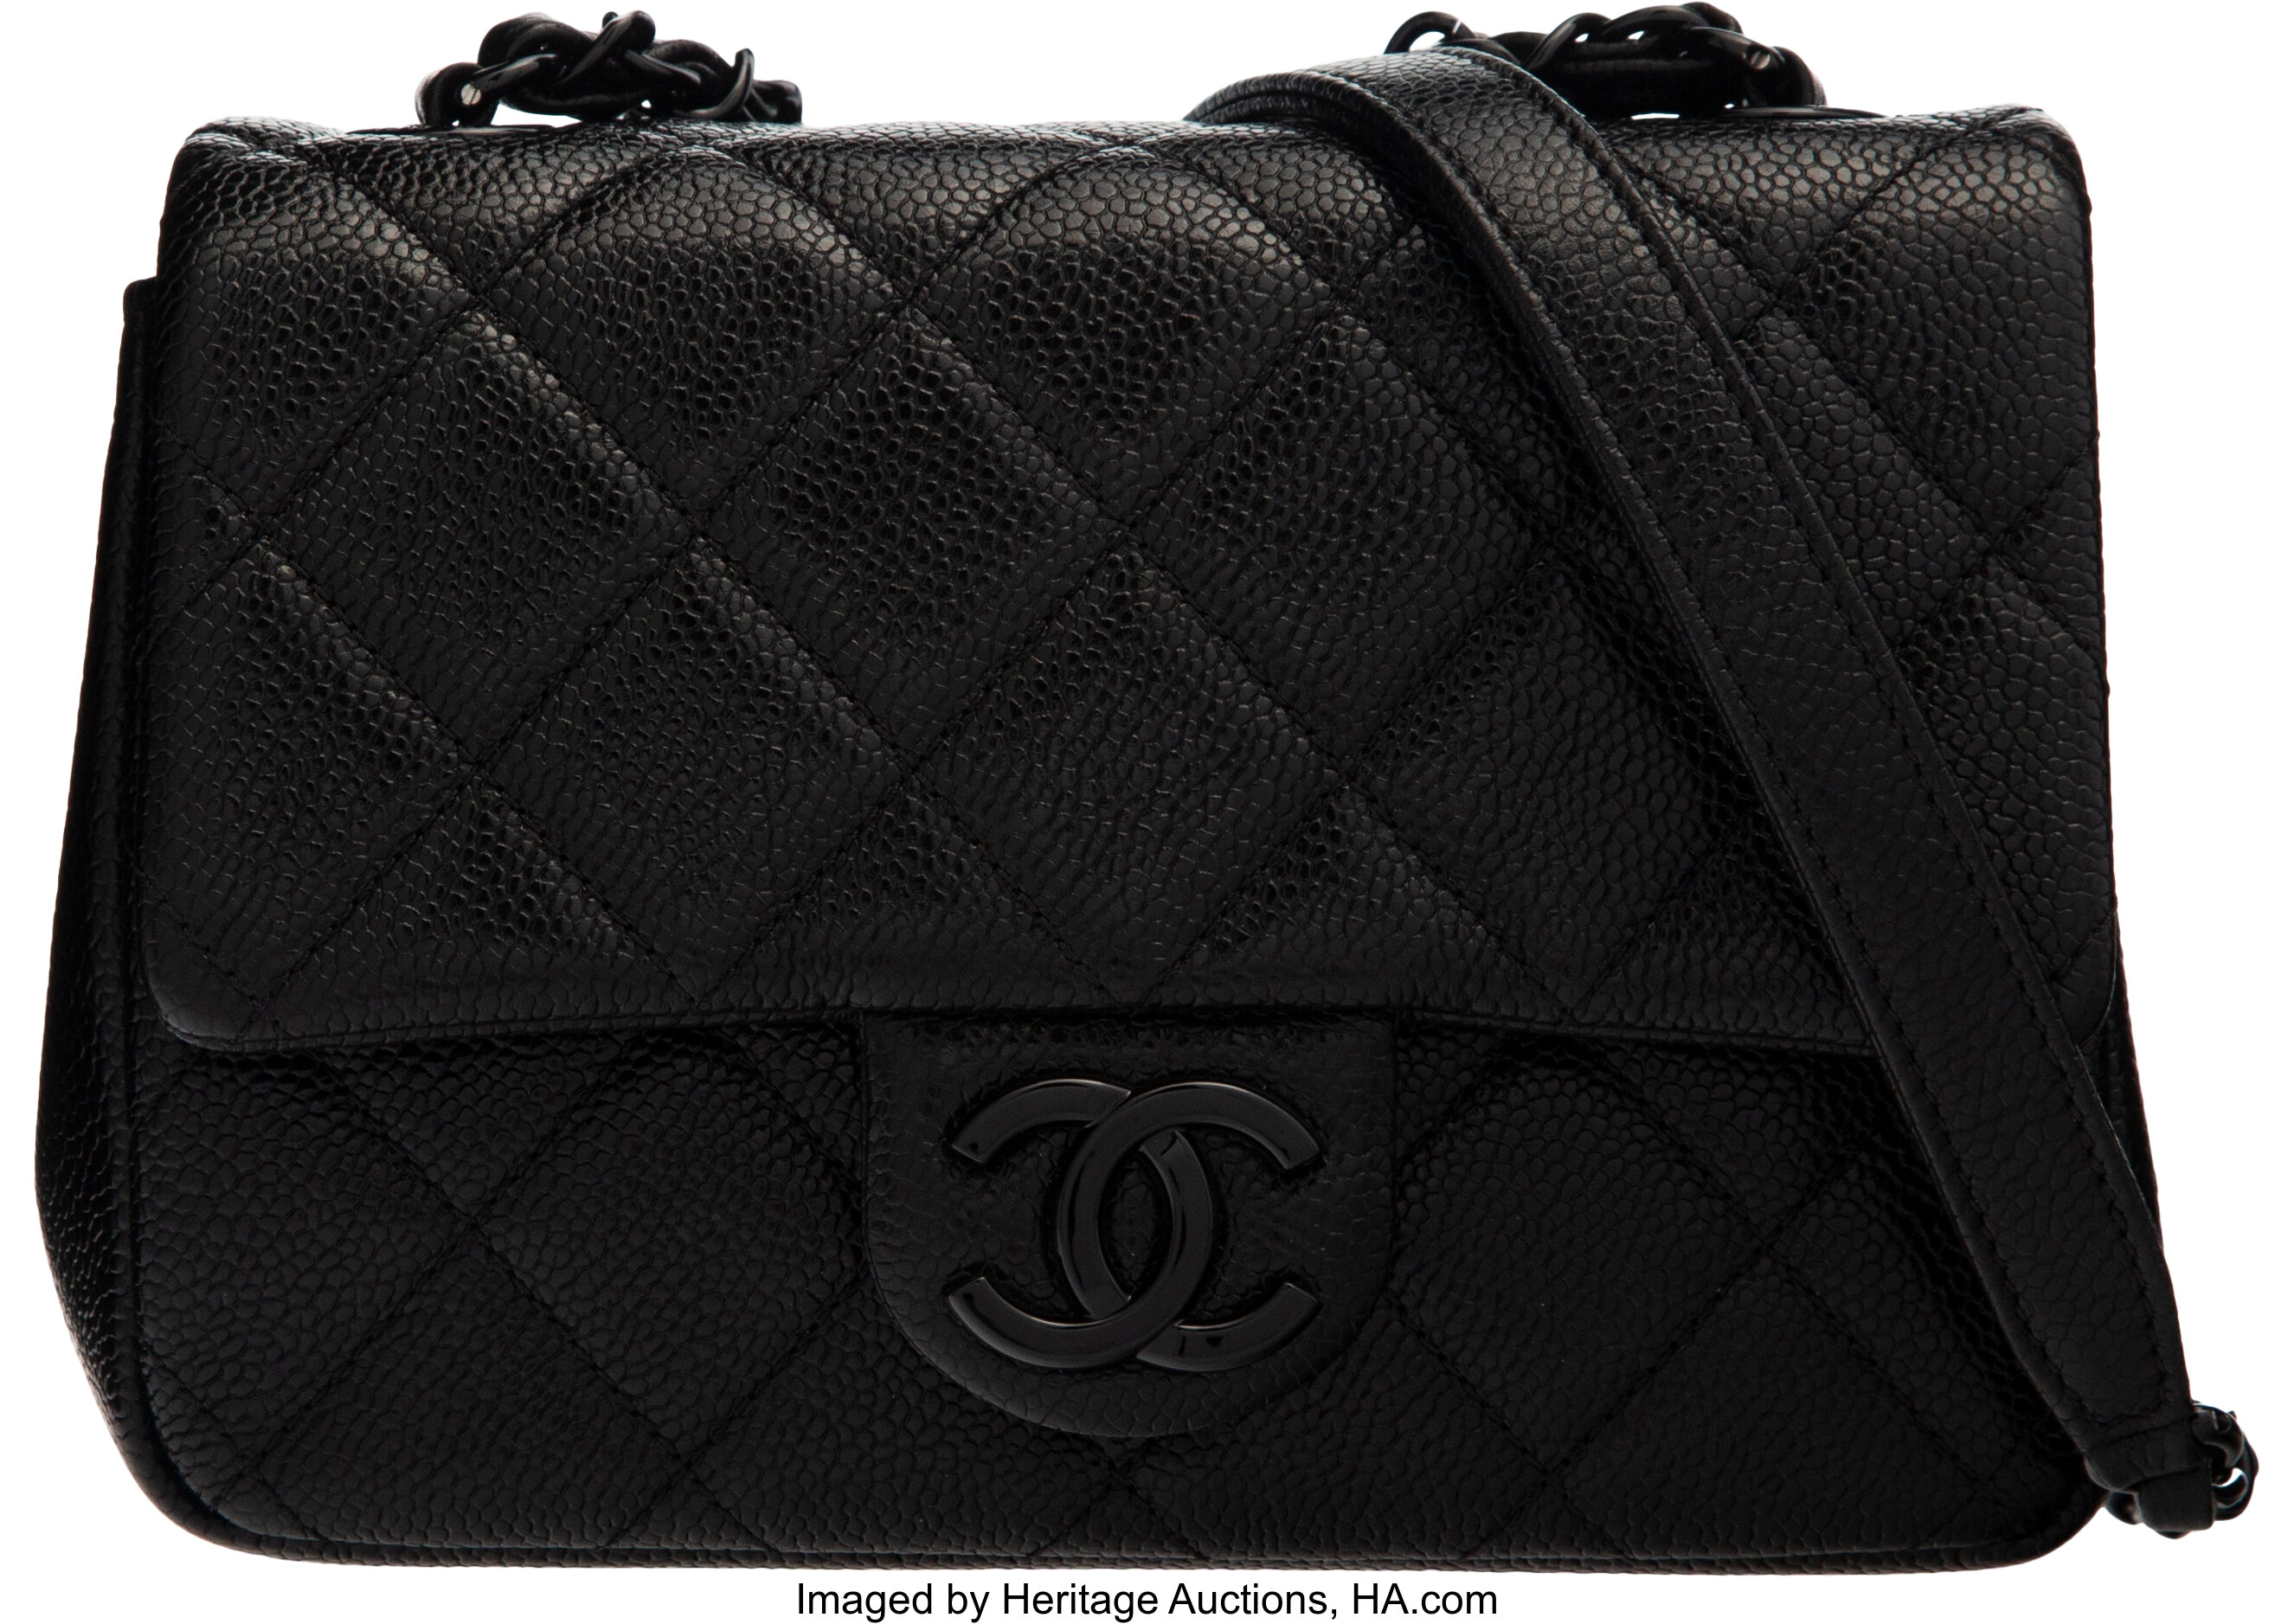 Chanel So Black Quilted Caviar Leather Mini Flap Bag. Condition: 1., Lot # 58003